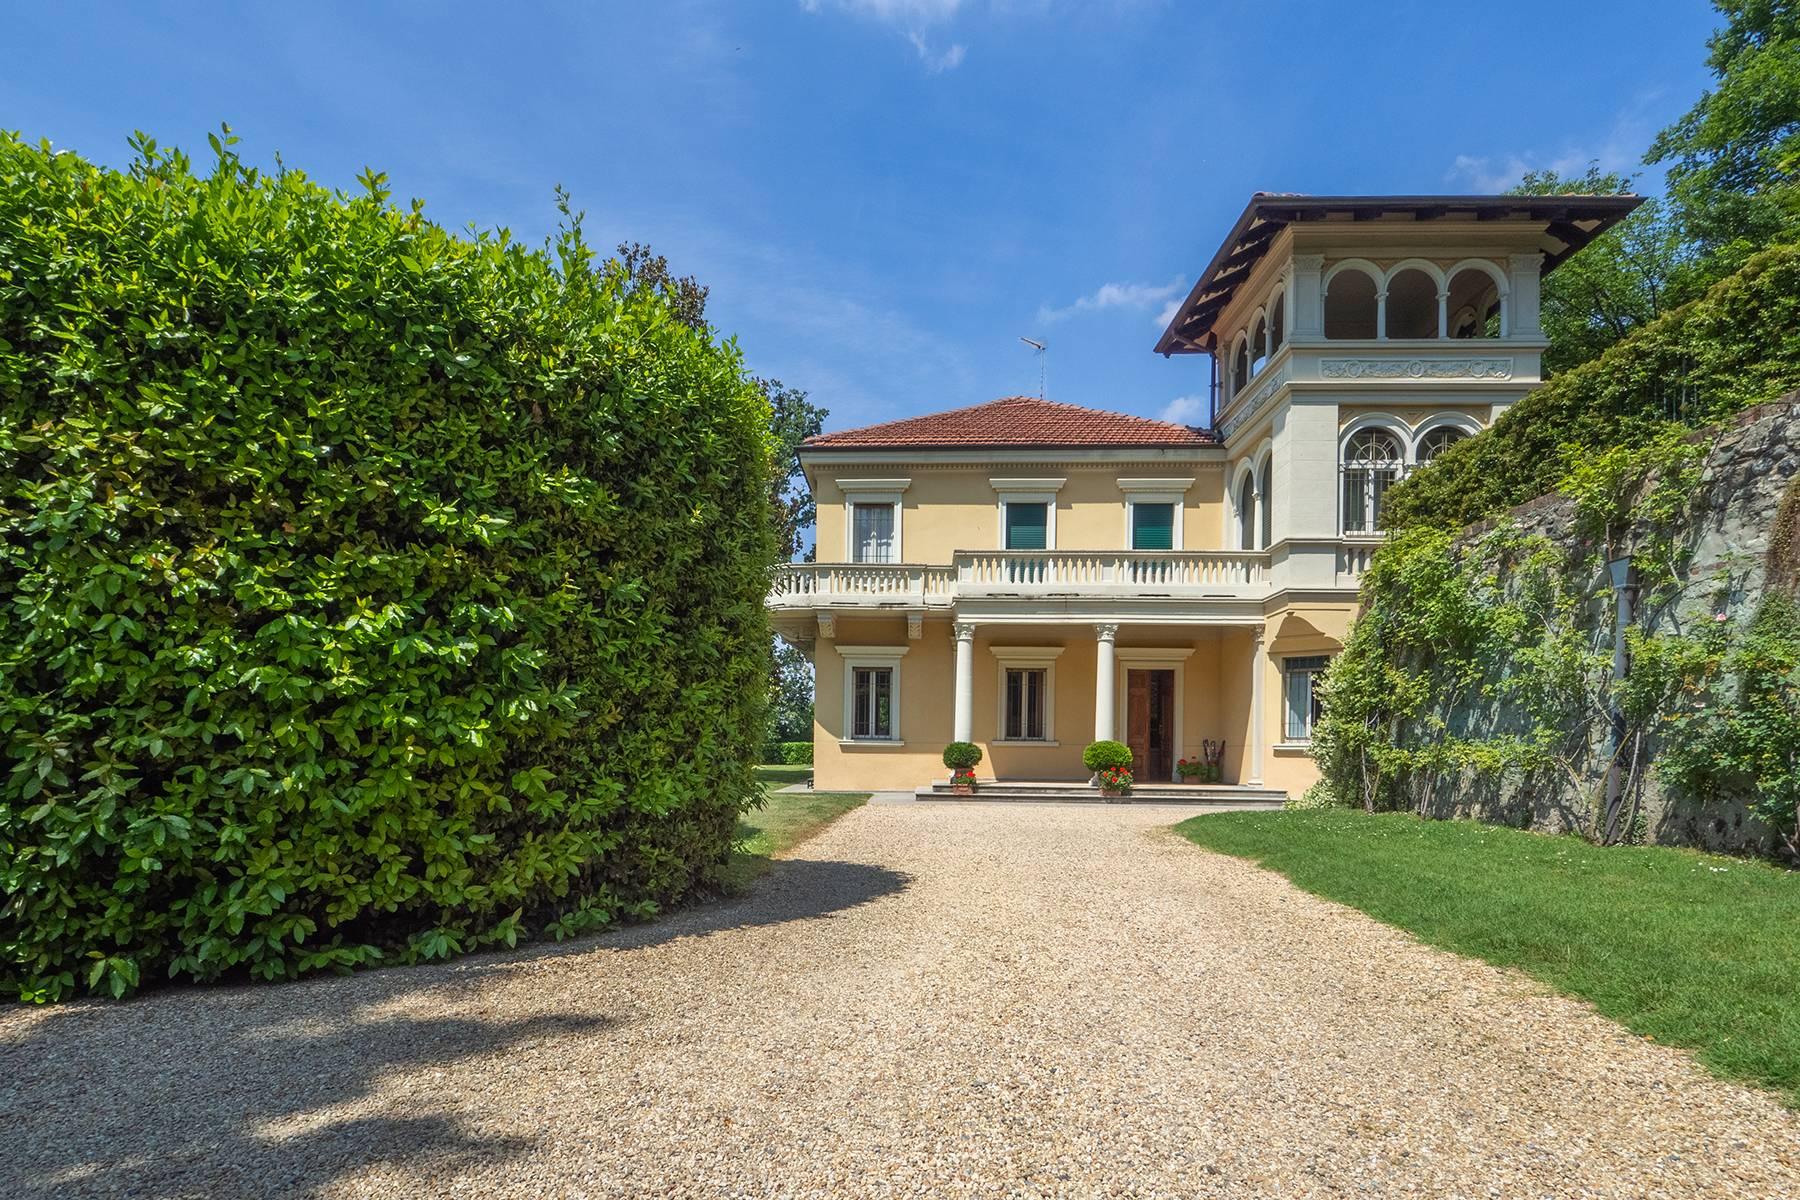 Exquisite villa with swimming pool in the hill of Turin - 1